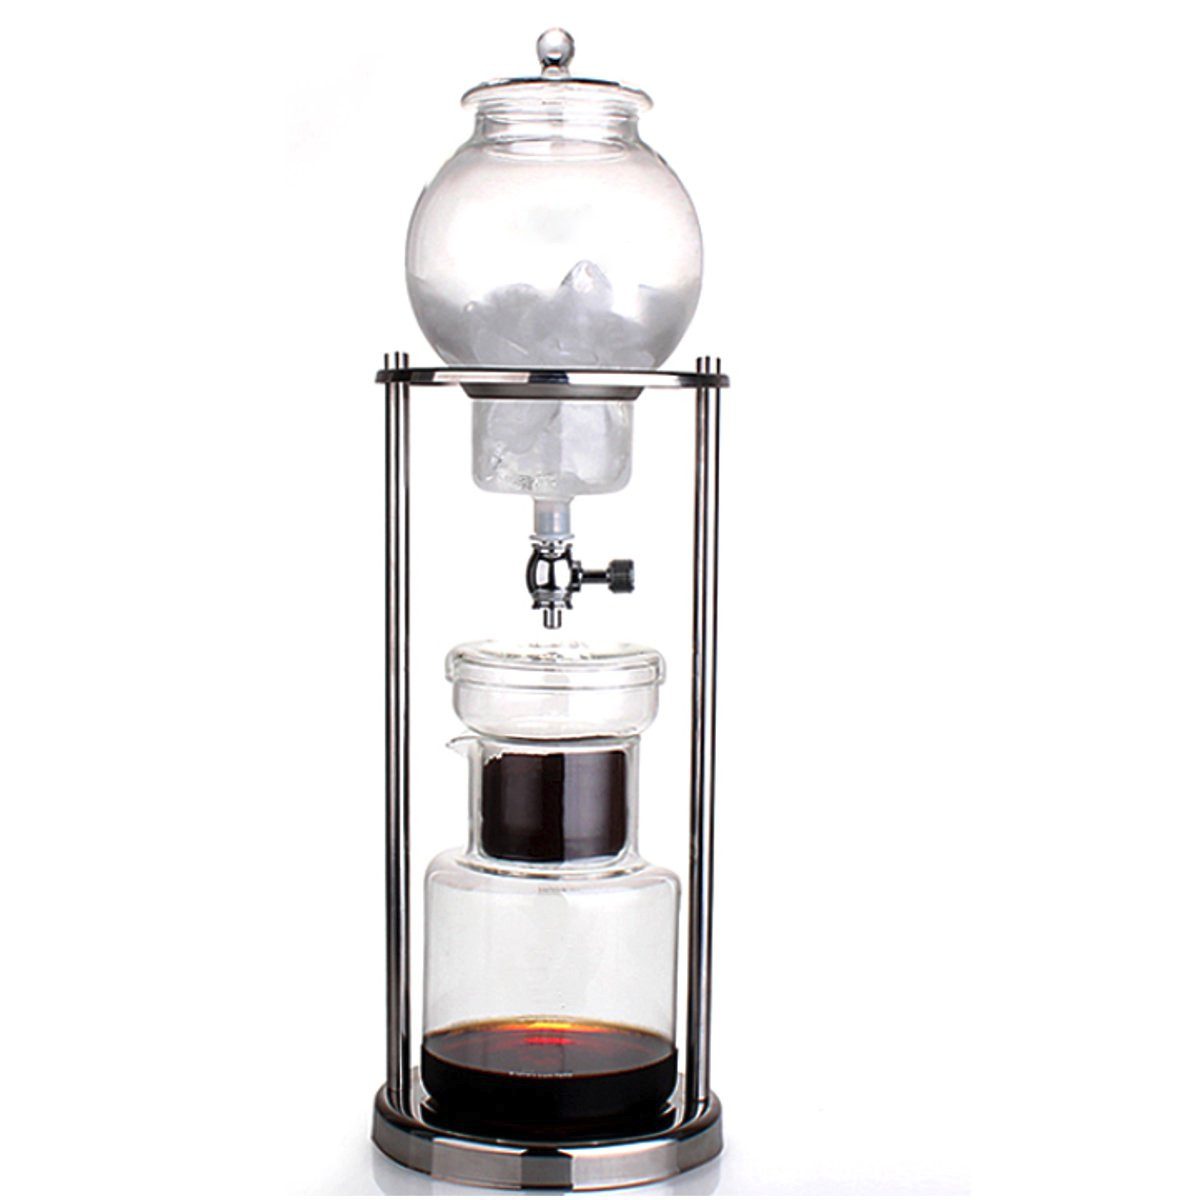 1000ml-Dutch-Coffee-Pot-Cold-Water-Drip-Coffee-Maker-Serve-For-10-Cups-1338008